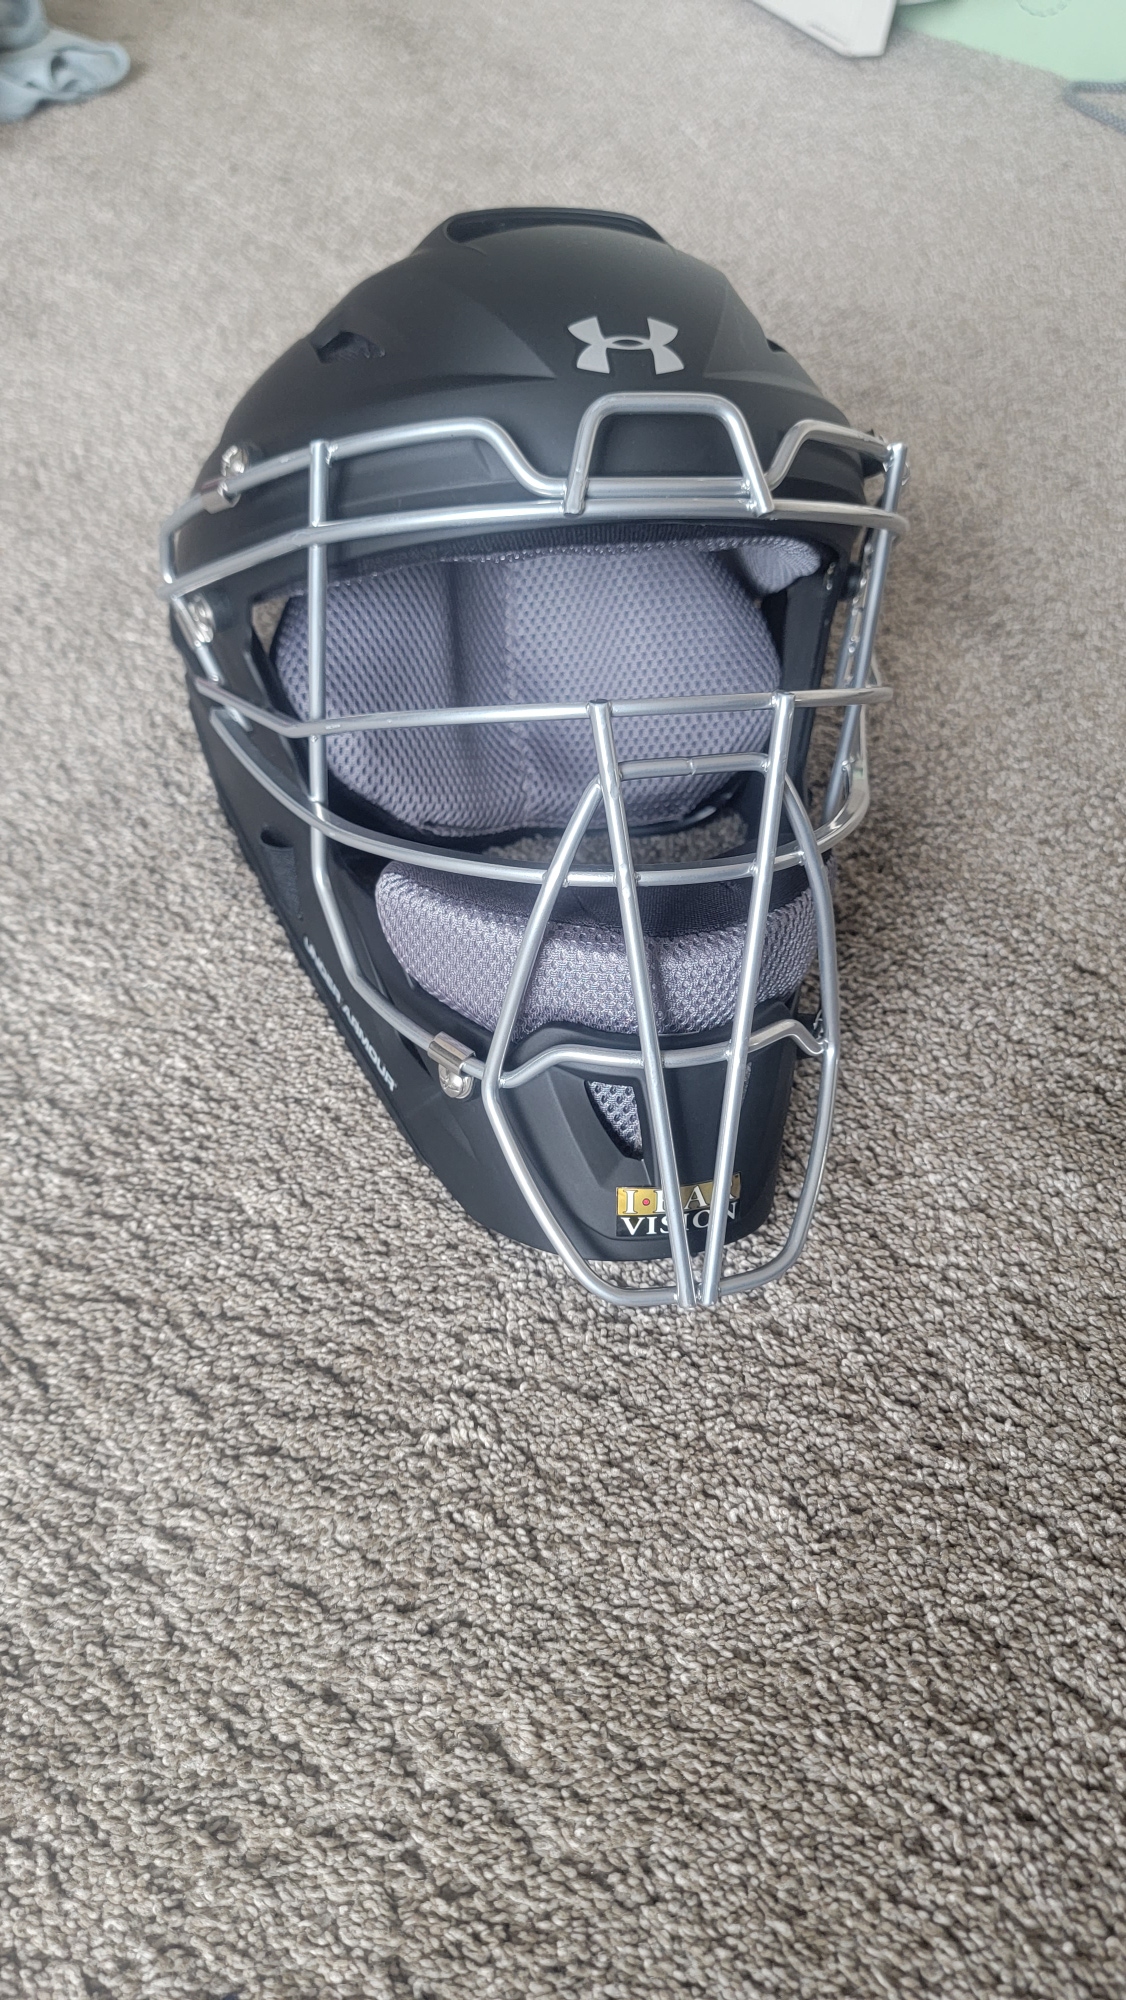 New Under Armour Catcher's Mask